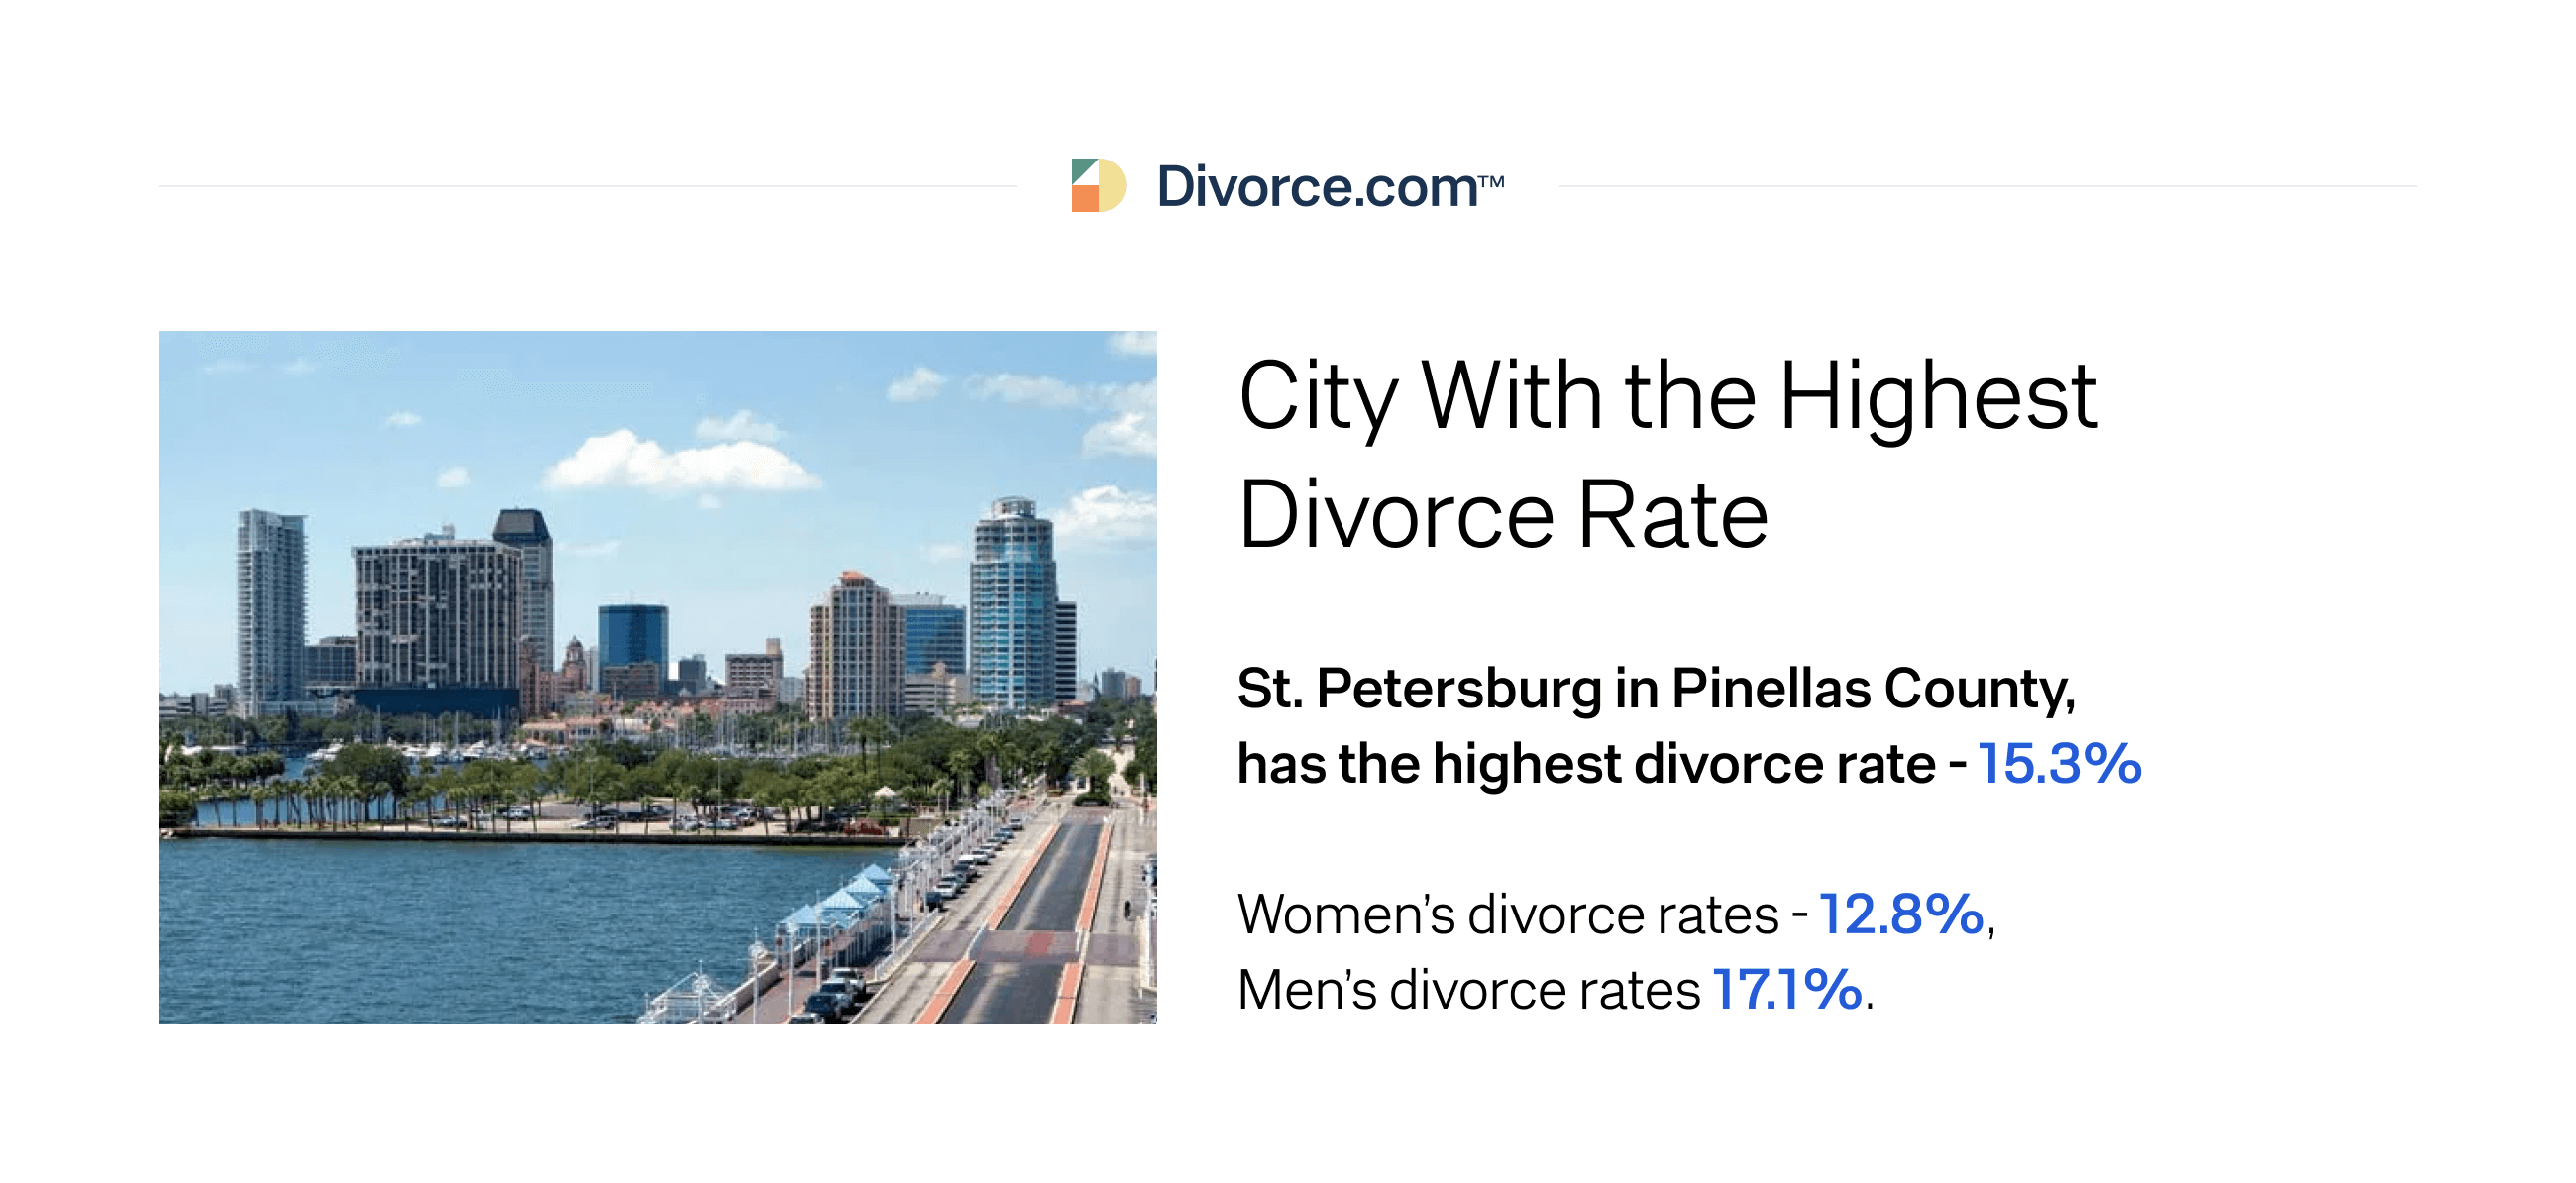 City With the Highest Divorce Rate